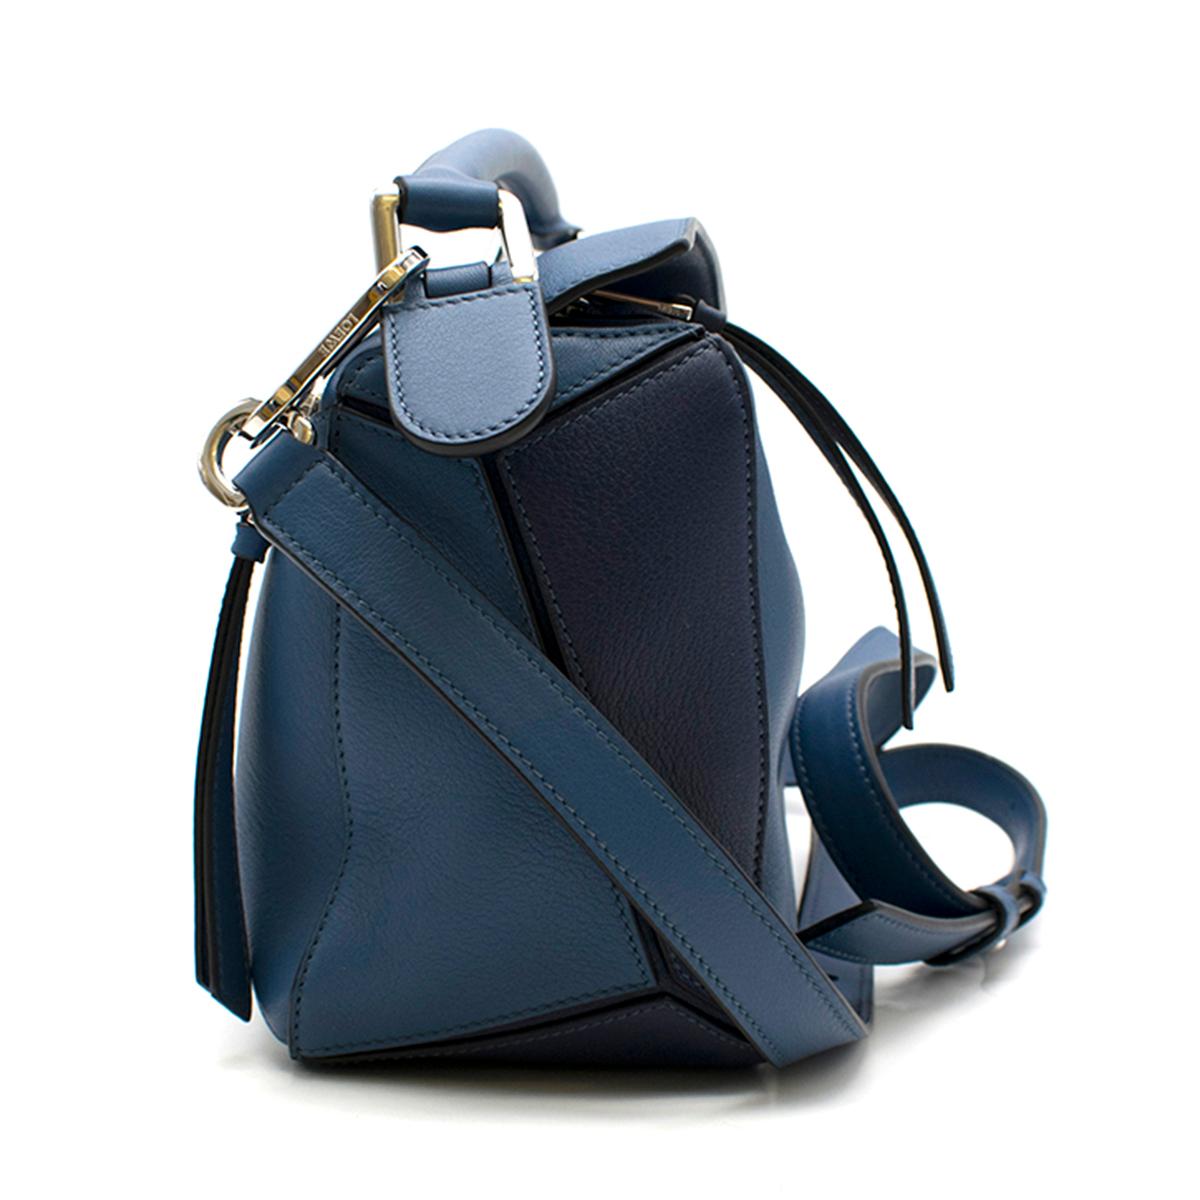 Loewe Blue Puzzle Small Bag 

- new iconic Loewe Puzzle bag
- internal details: fabric lining, internal slot pockets
- back zip pocket
- detachable shoulder strap, 
- top handle
- zipped top

This item come with the original dust bag.

Please note,